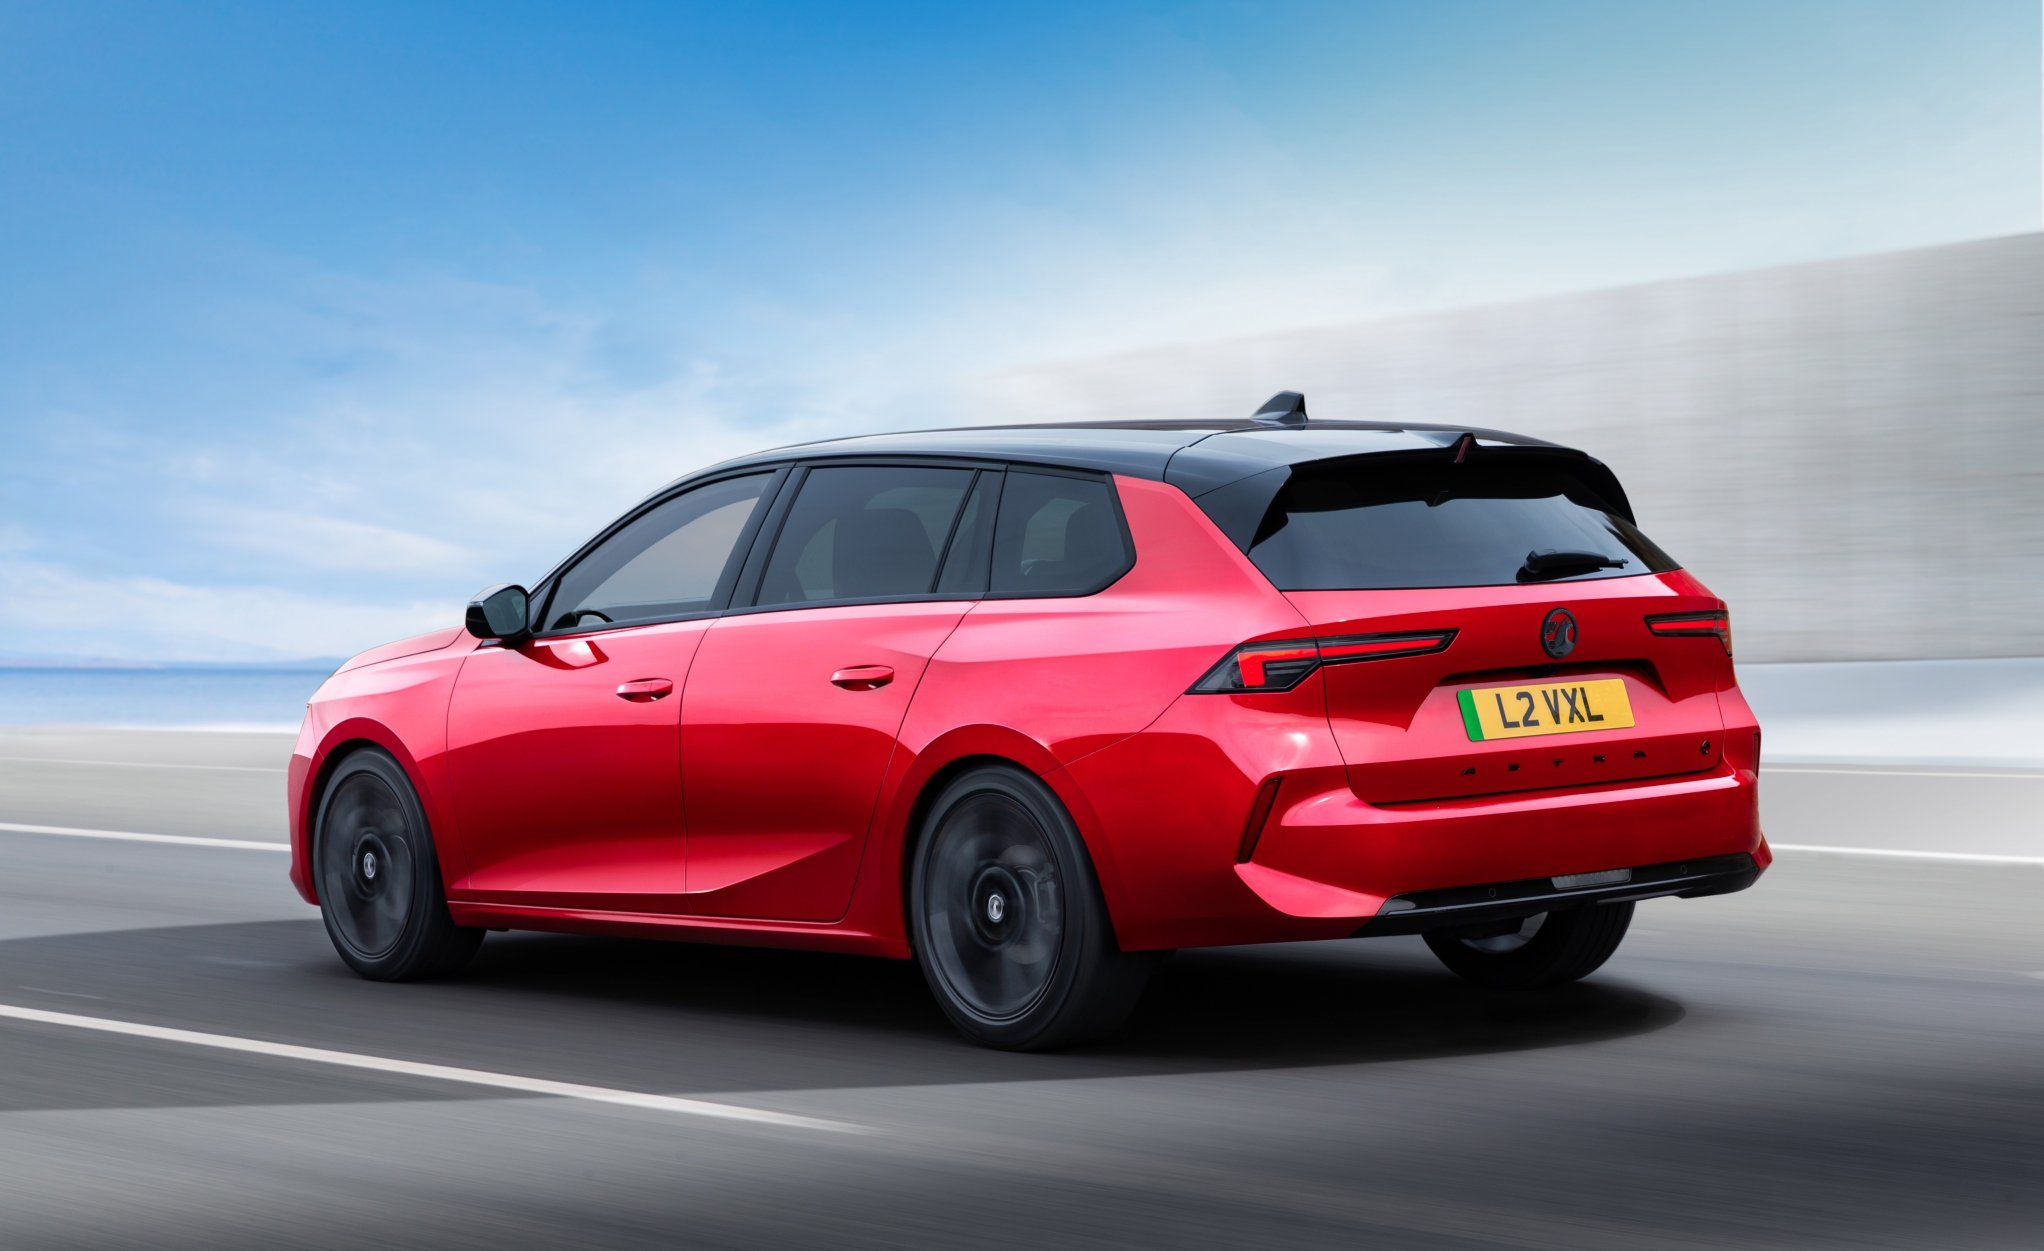 All-New Astra Electric and Astra Sports Tourer Electric to arrive in 2023